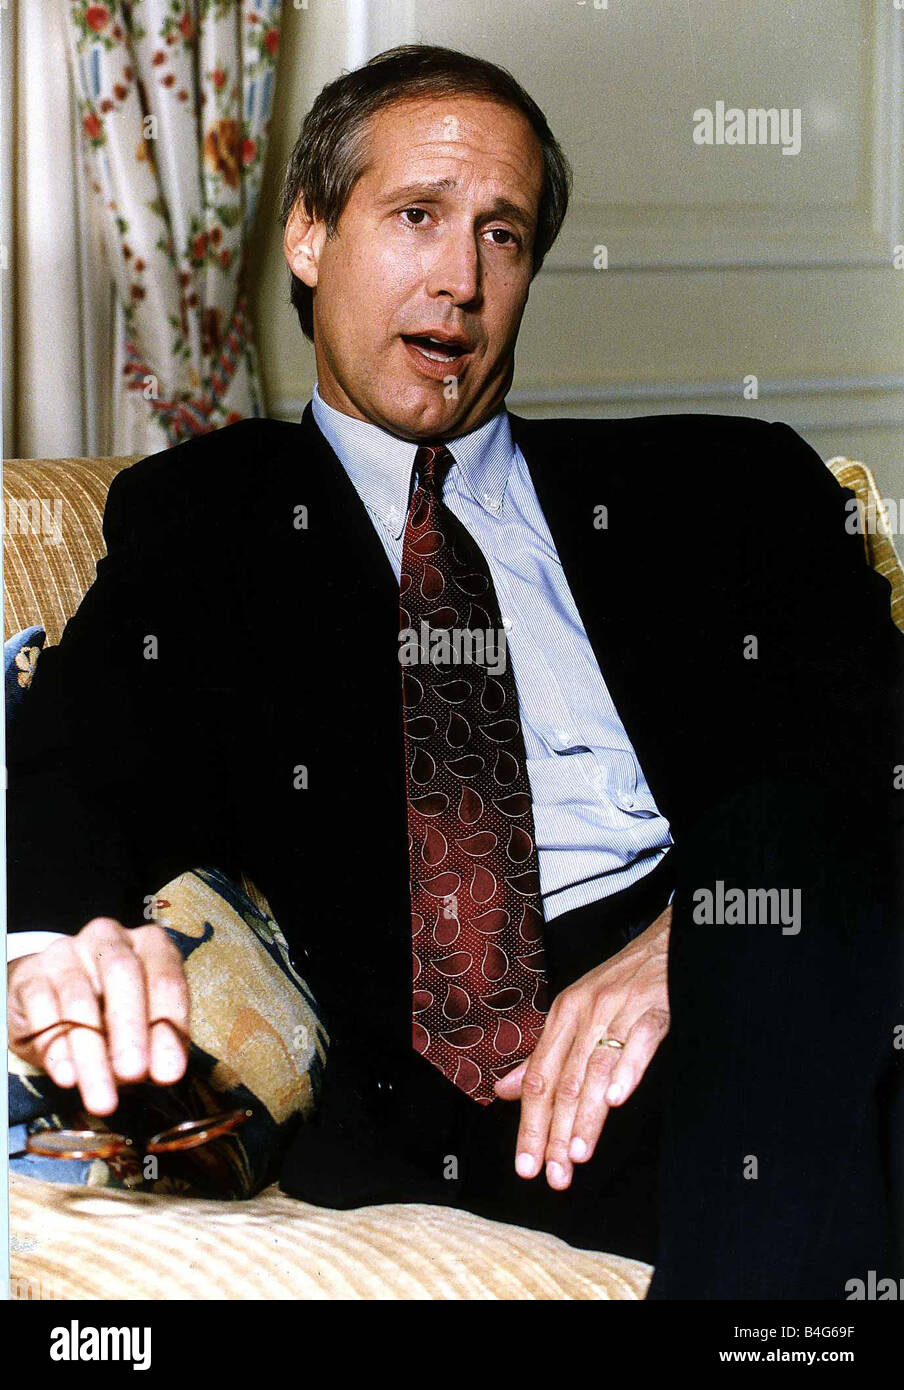 Chevy Chase Actor Stock Photo - Alamy